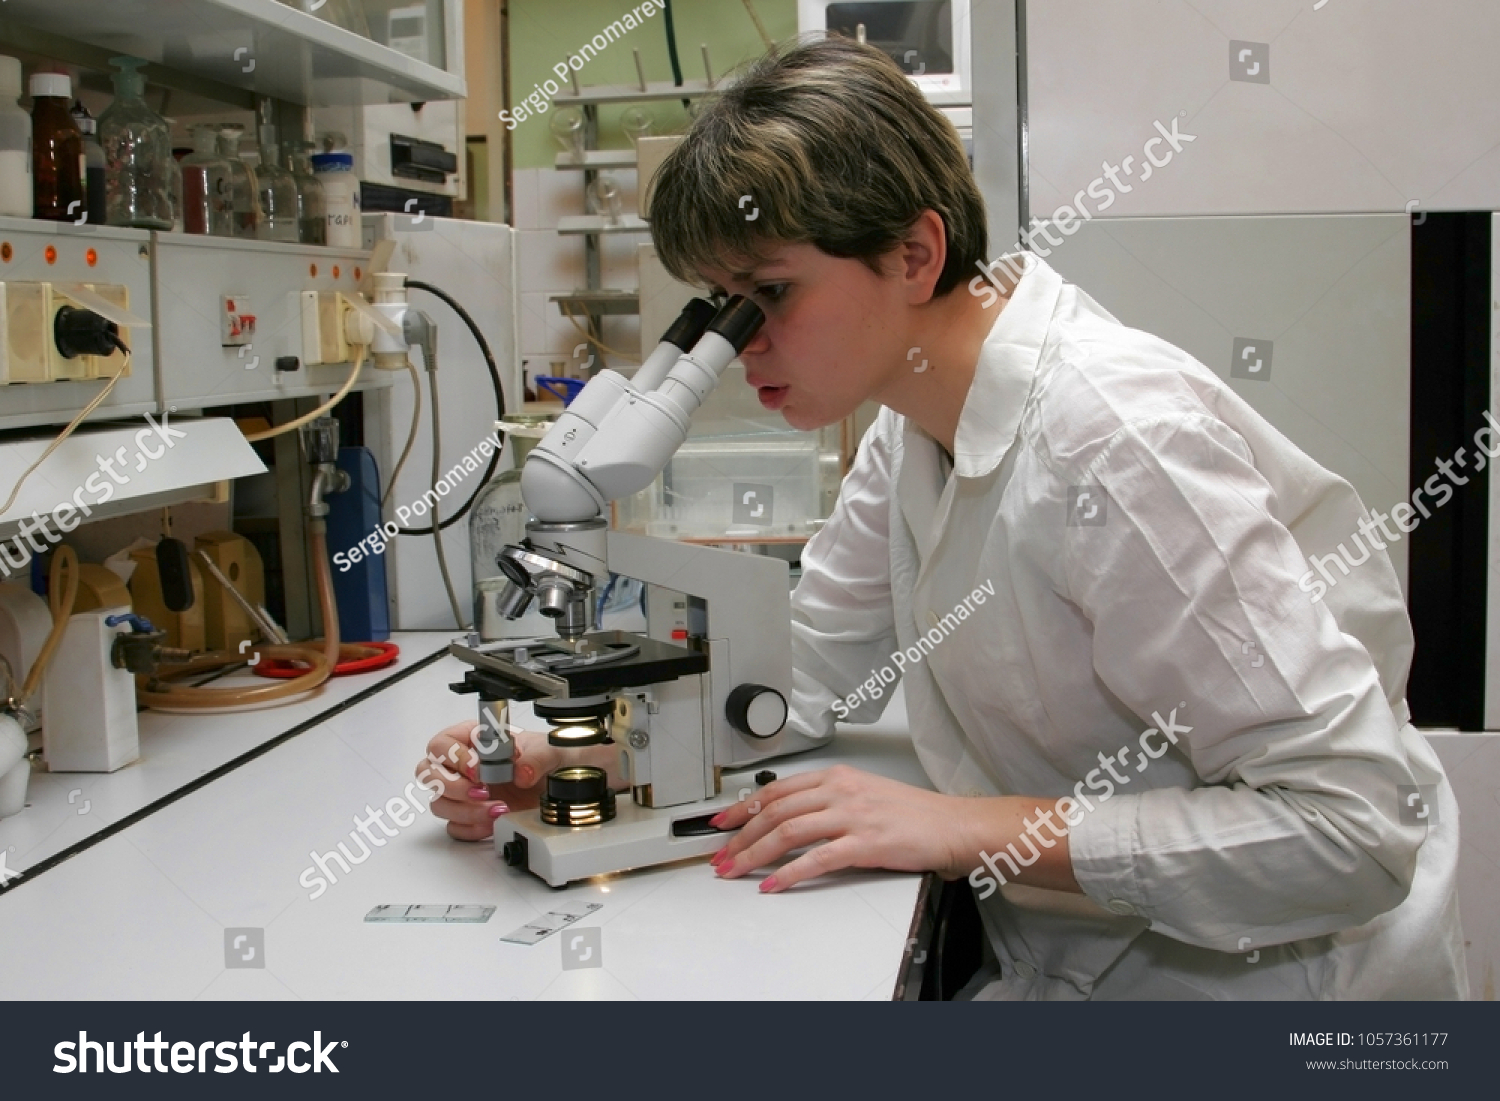 Working in the laboratory in moscow university #1057361177